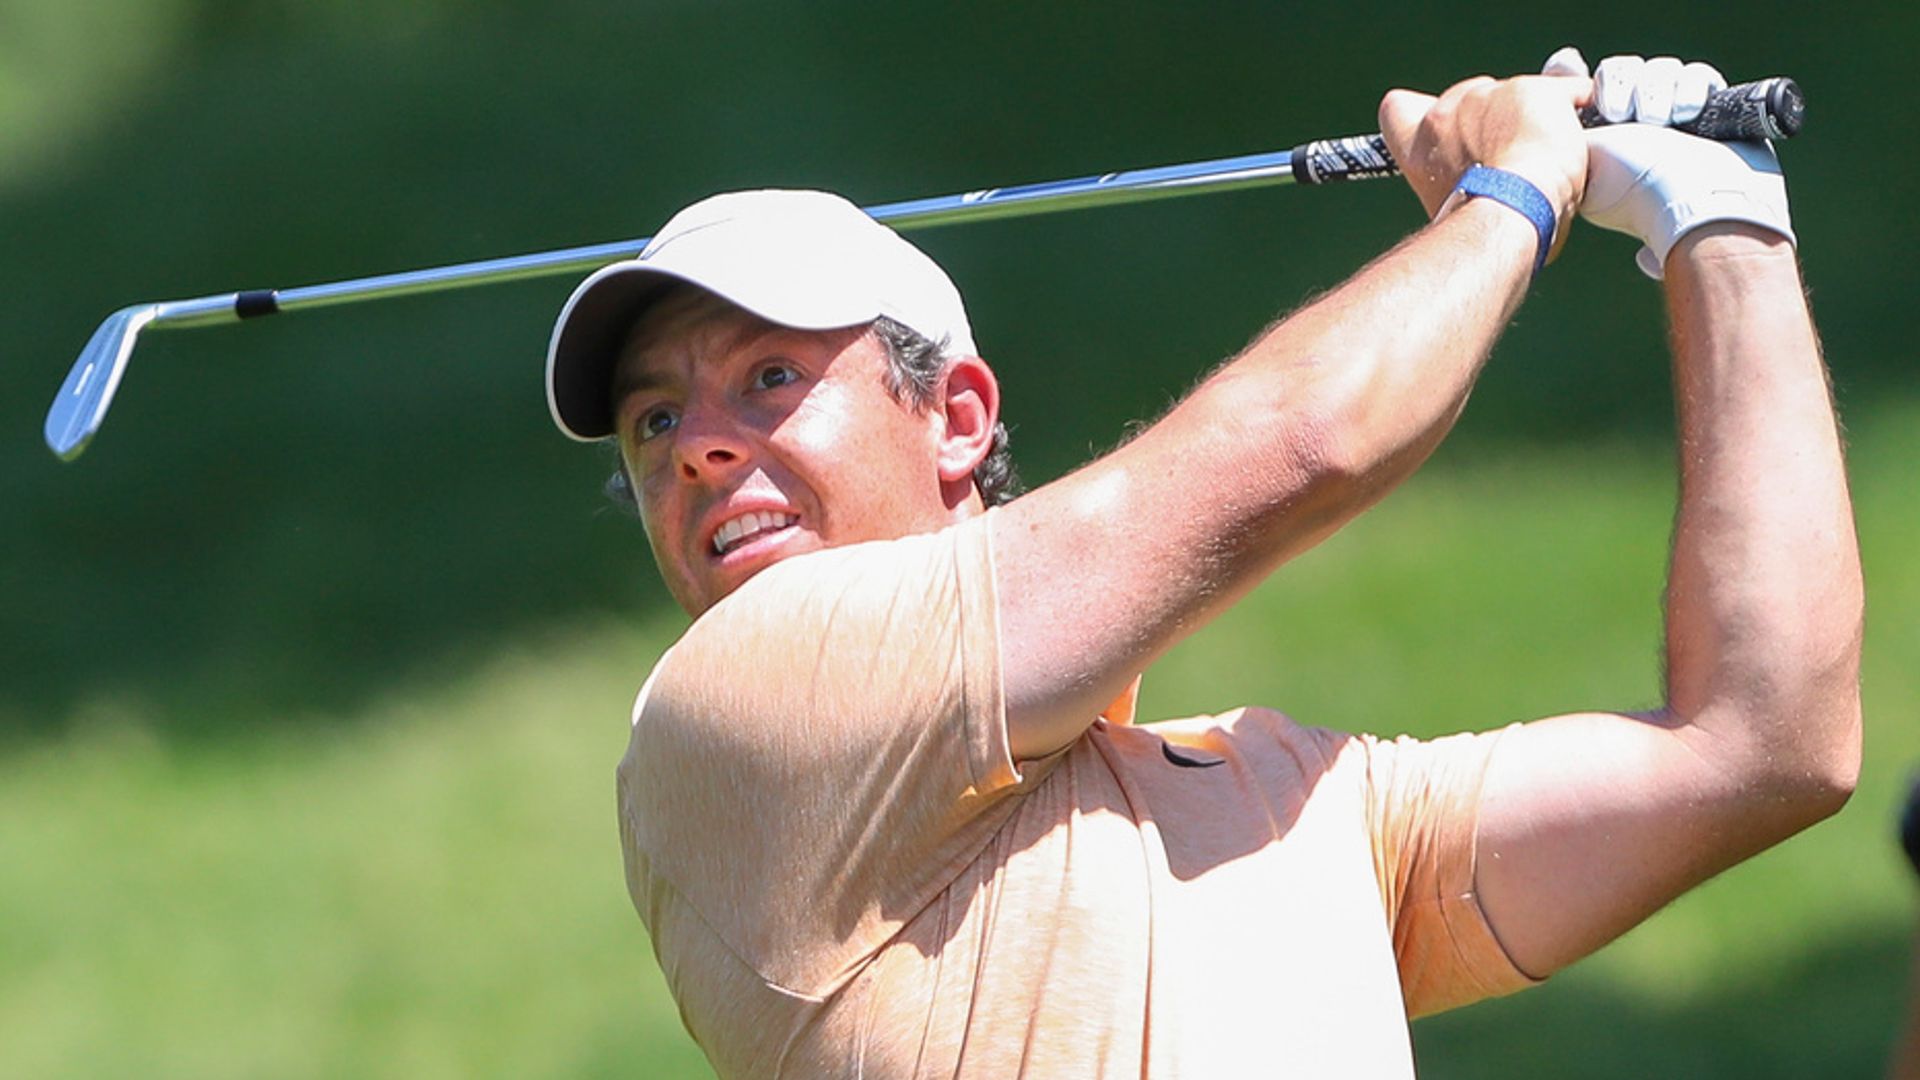 McIlroy bounces back with 68 at Memorial Tournament